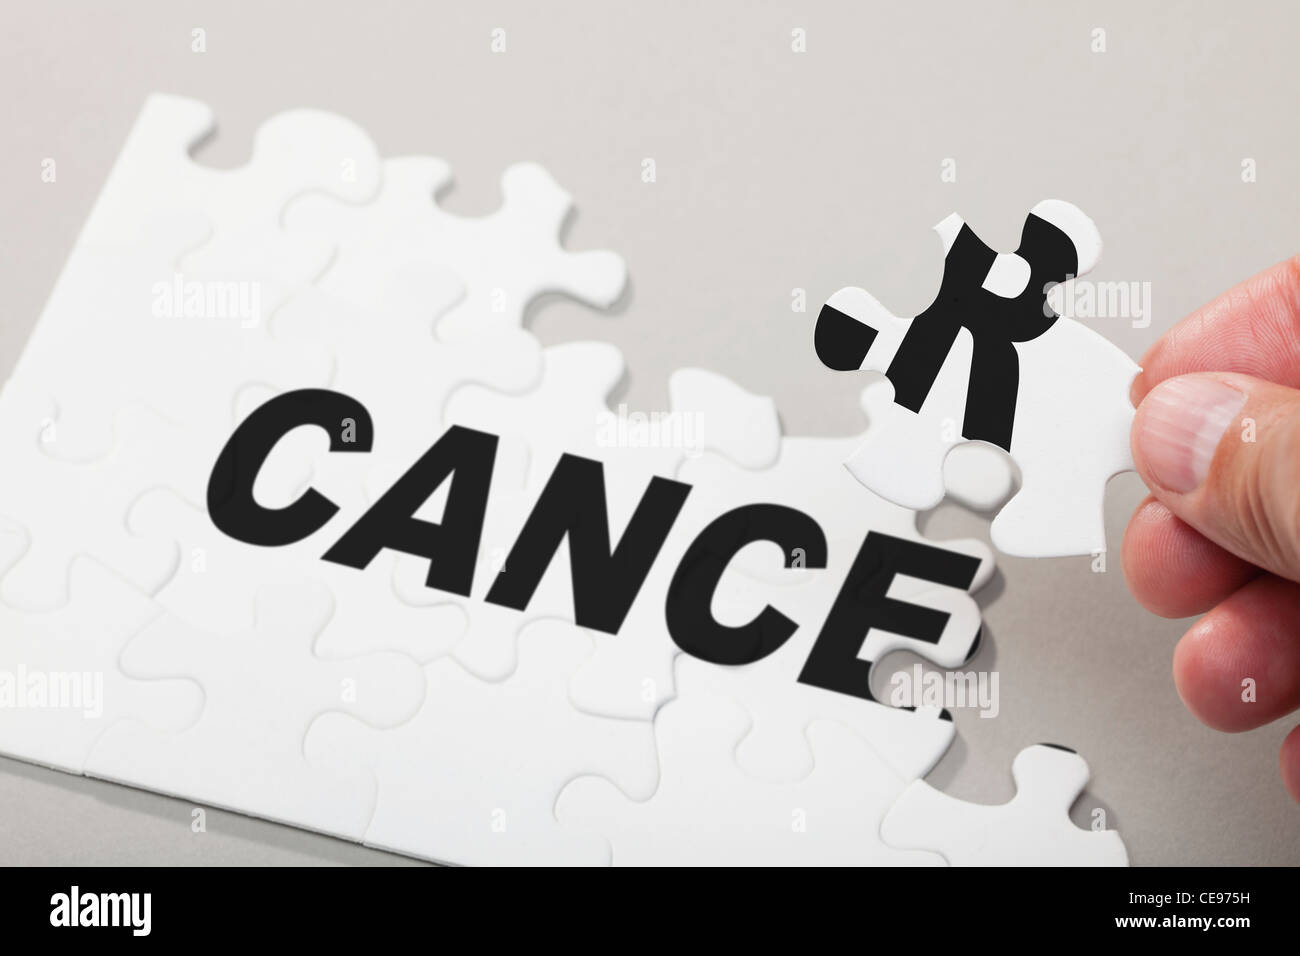 Male hand arranging puzzle pieces spelling out CANCER Stock Photo